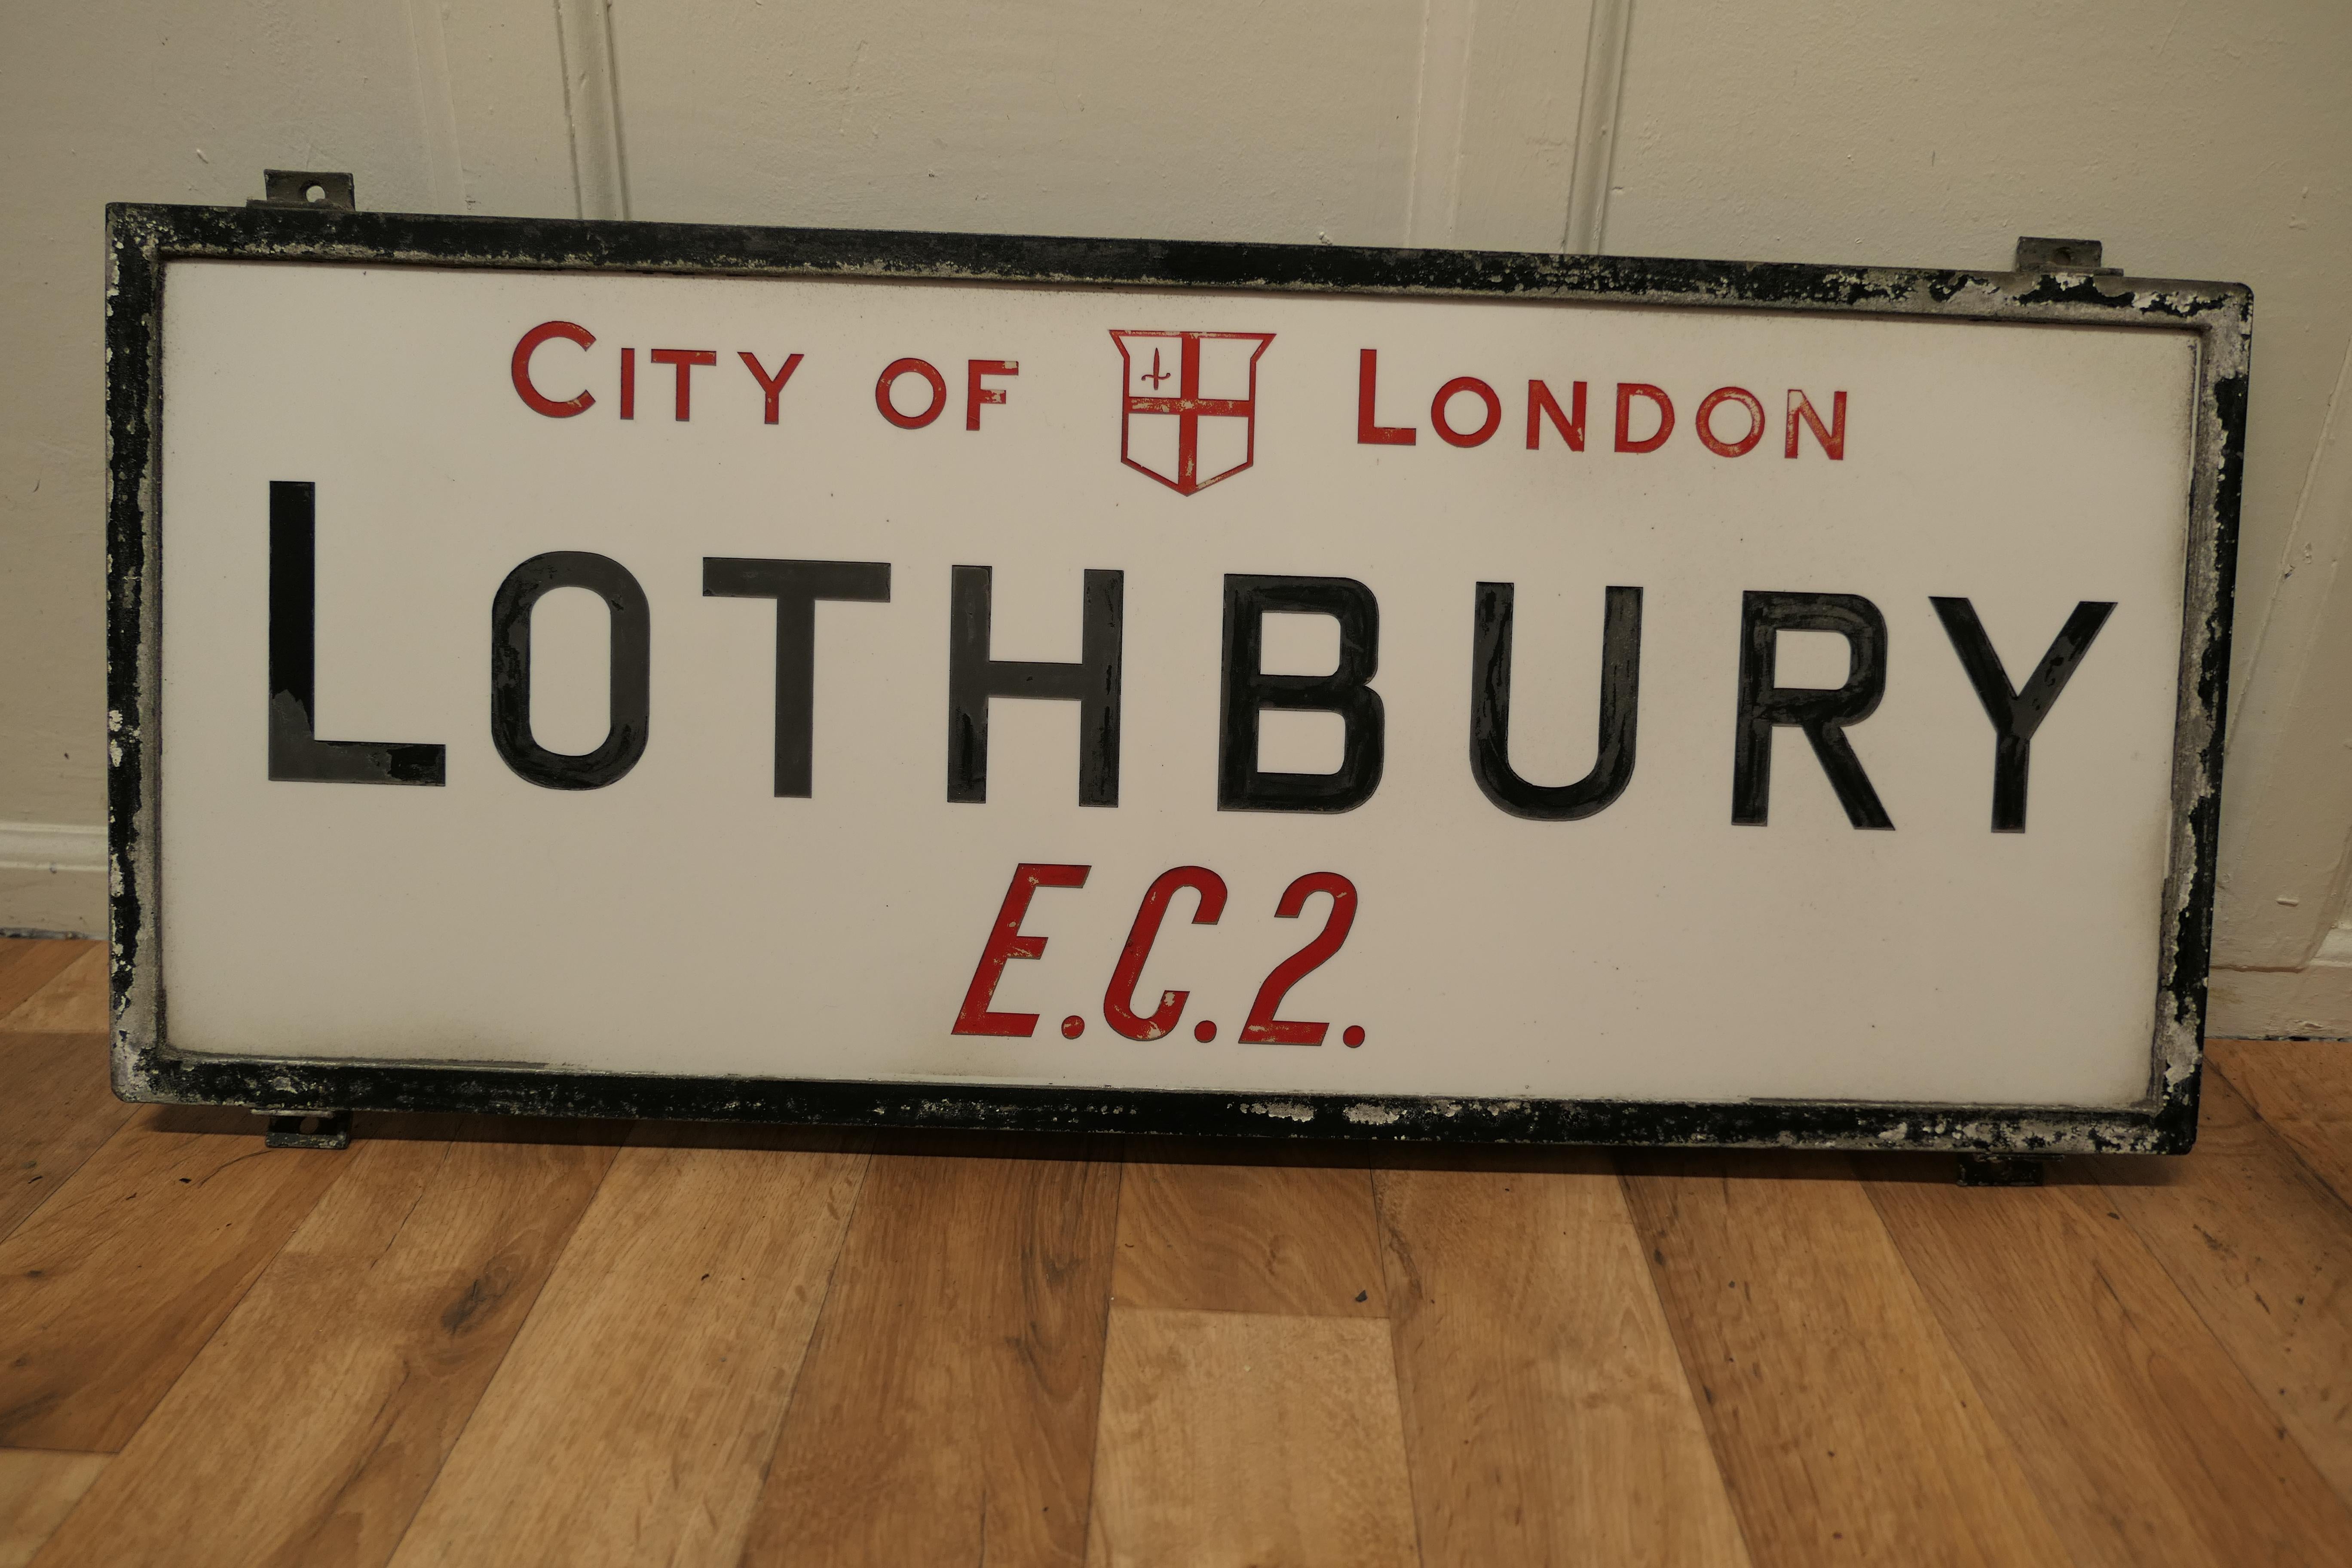 City of London glass Edwardian Street Sign, Lothbury E.C.2

This is a City of London Street sign, it is set in its Cast Iron Frame, it is made in etched Vitrolite Glass, the City Of London and E.C.3 are impressed in red and the other characters